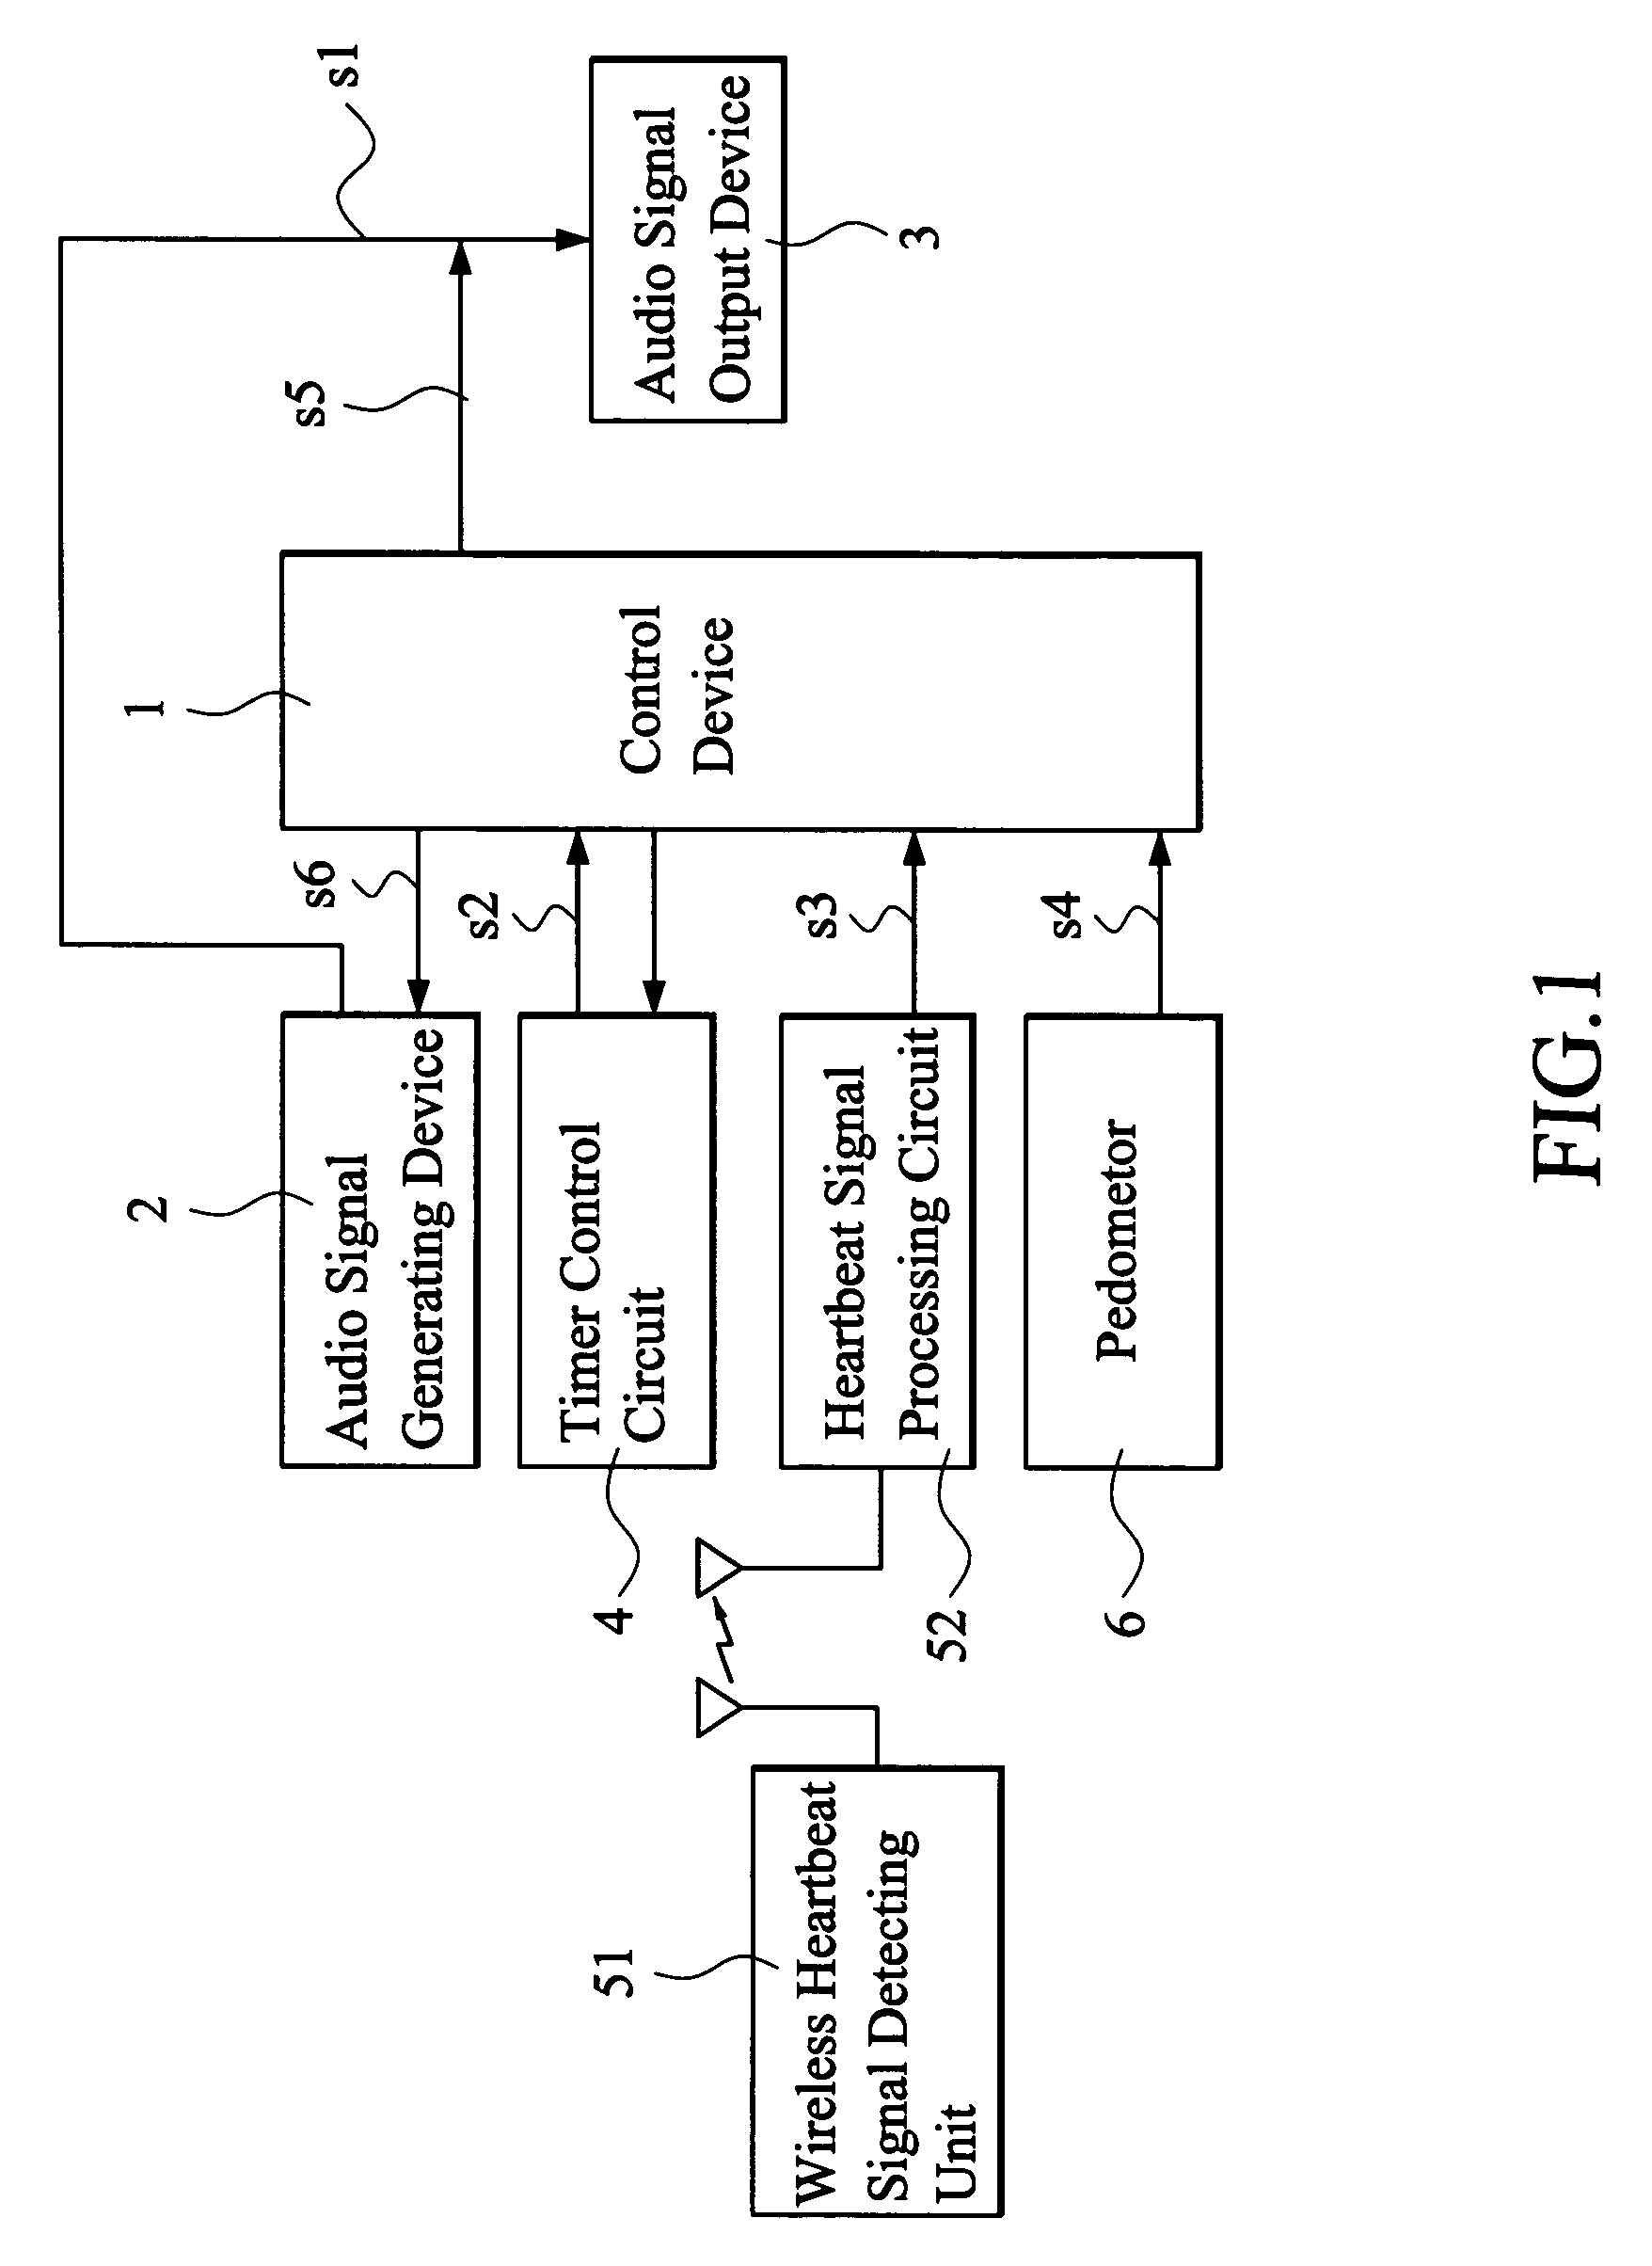 Portable audio device with body/motion signal reporting device